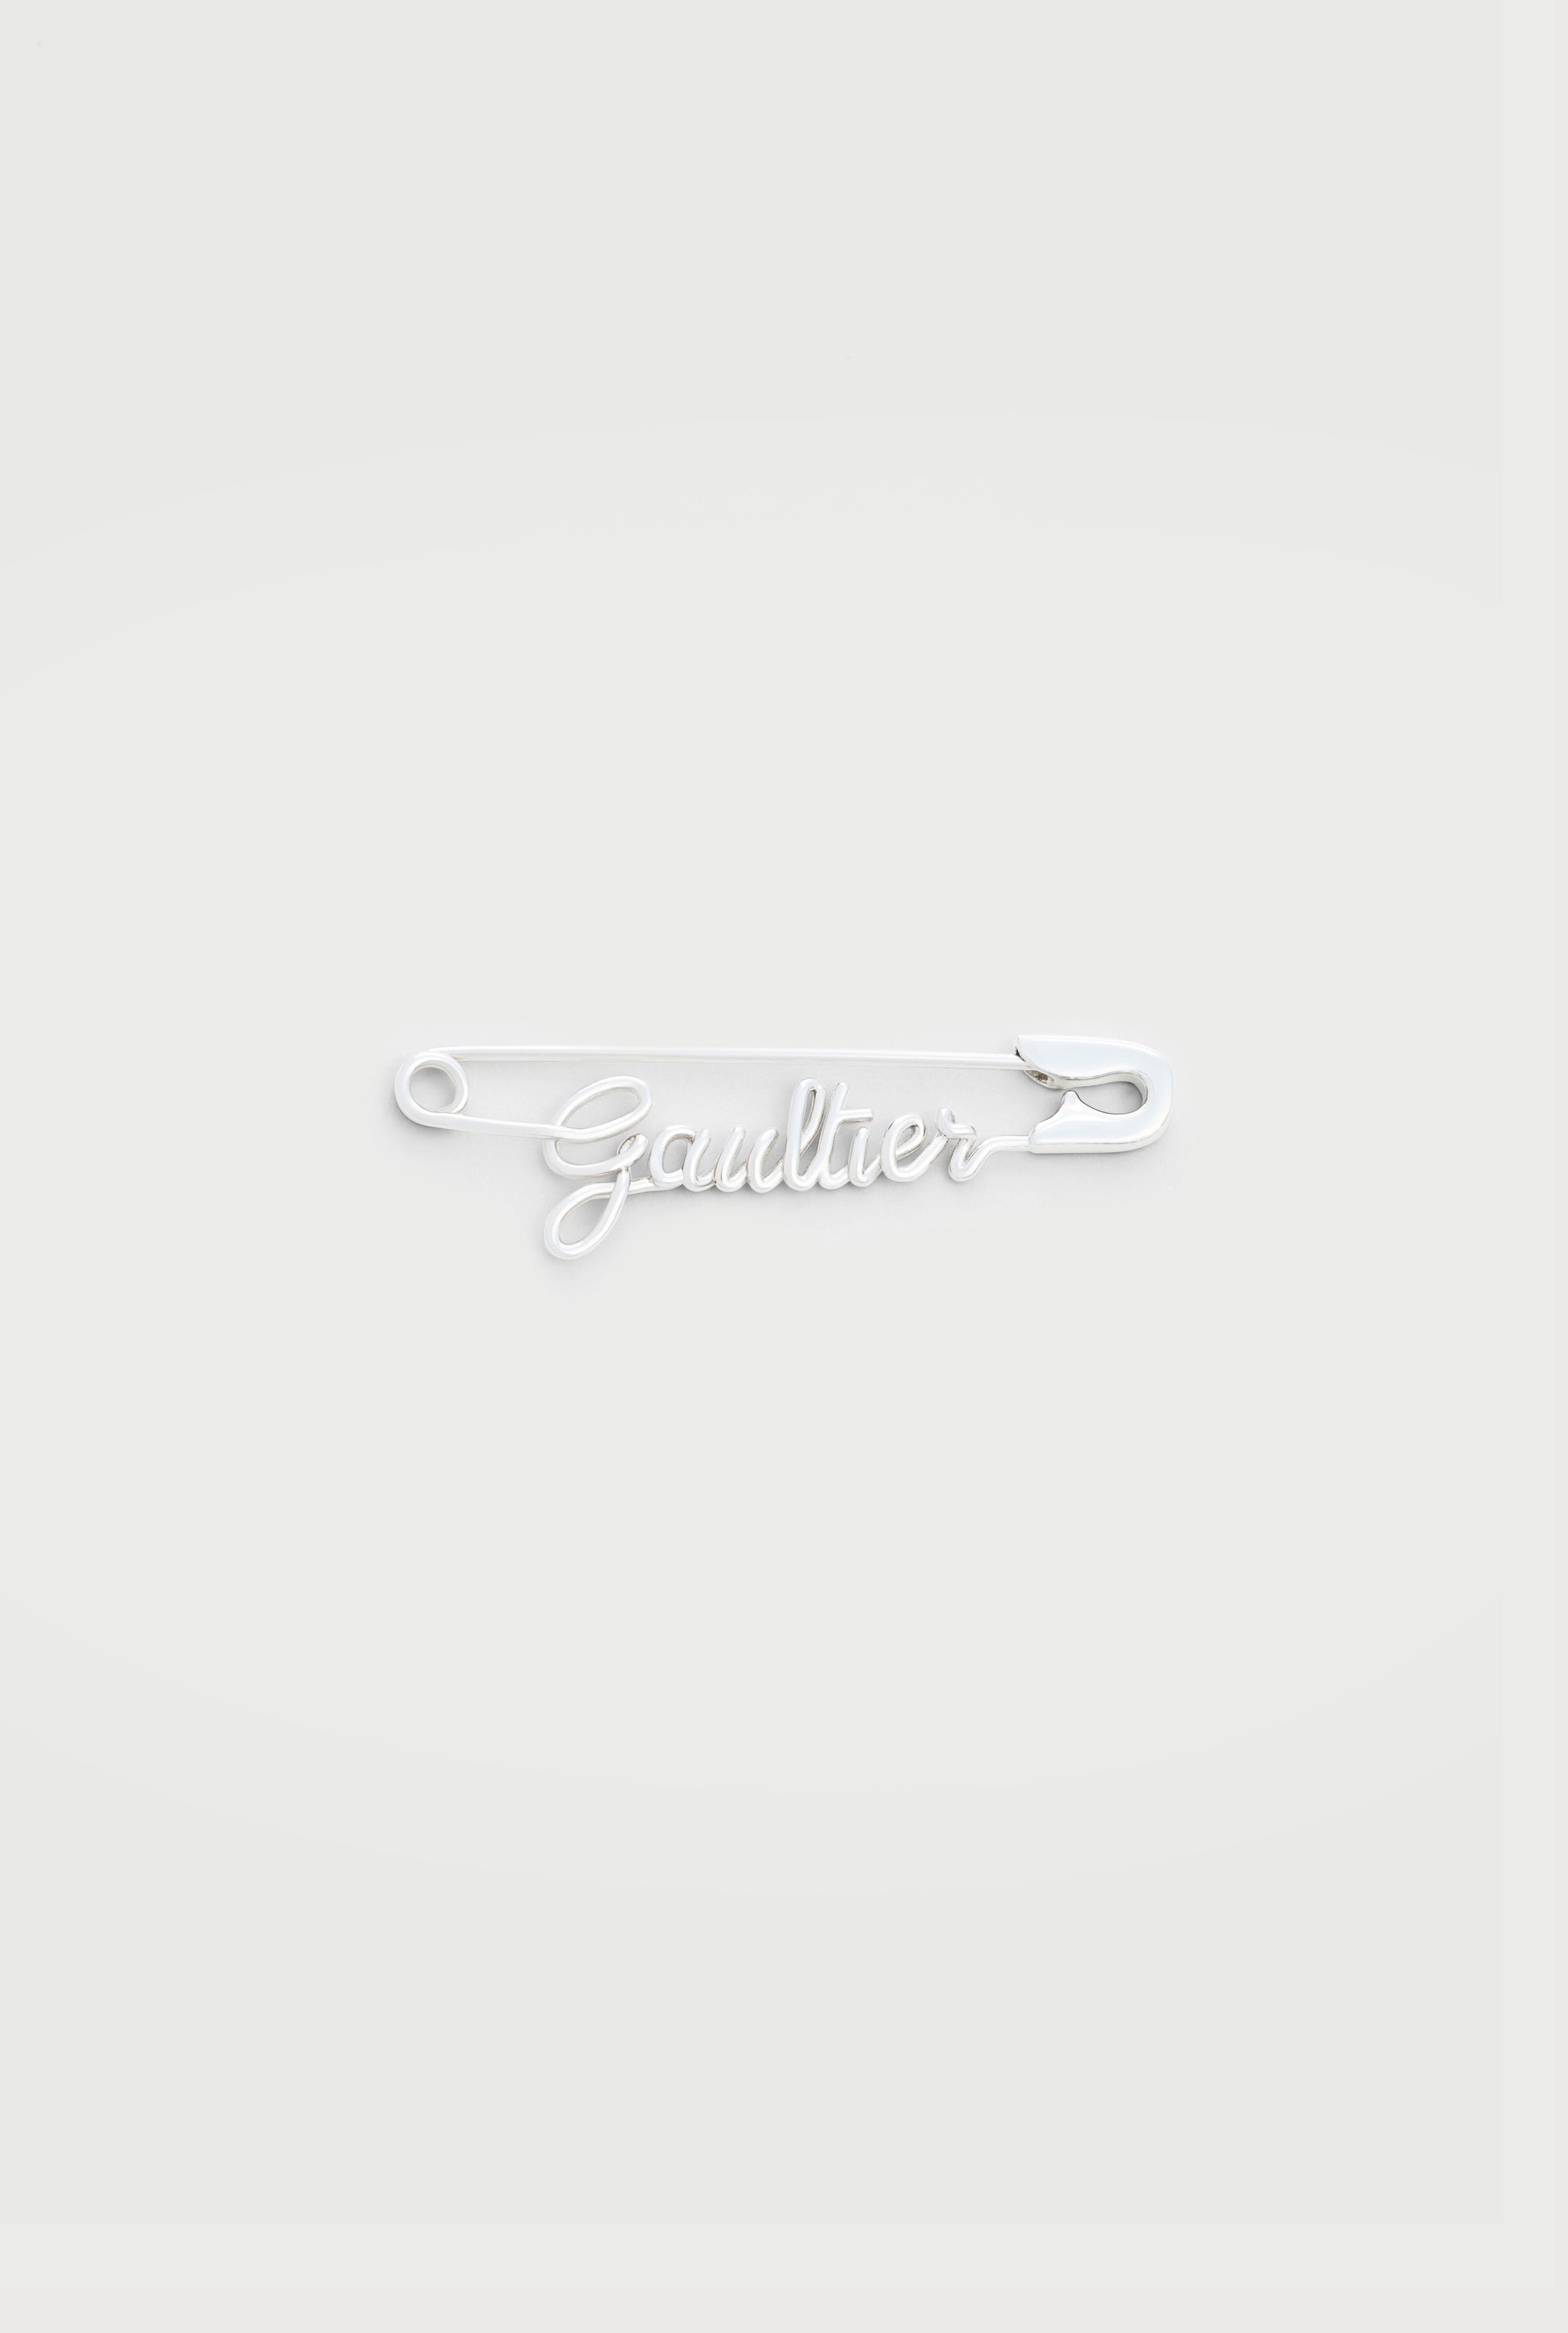 The Silver-Tone Gaultier Safety Pin Earring